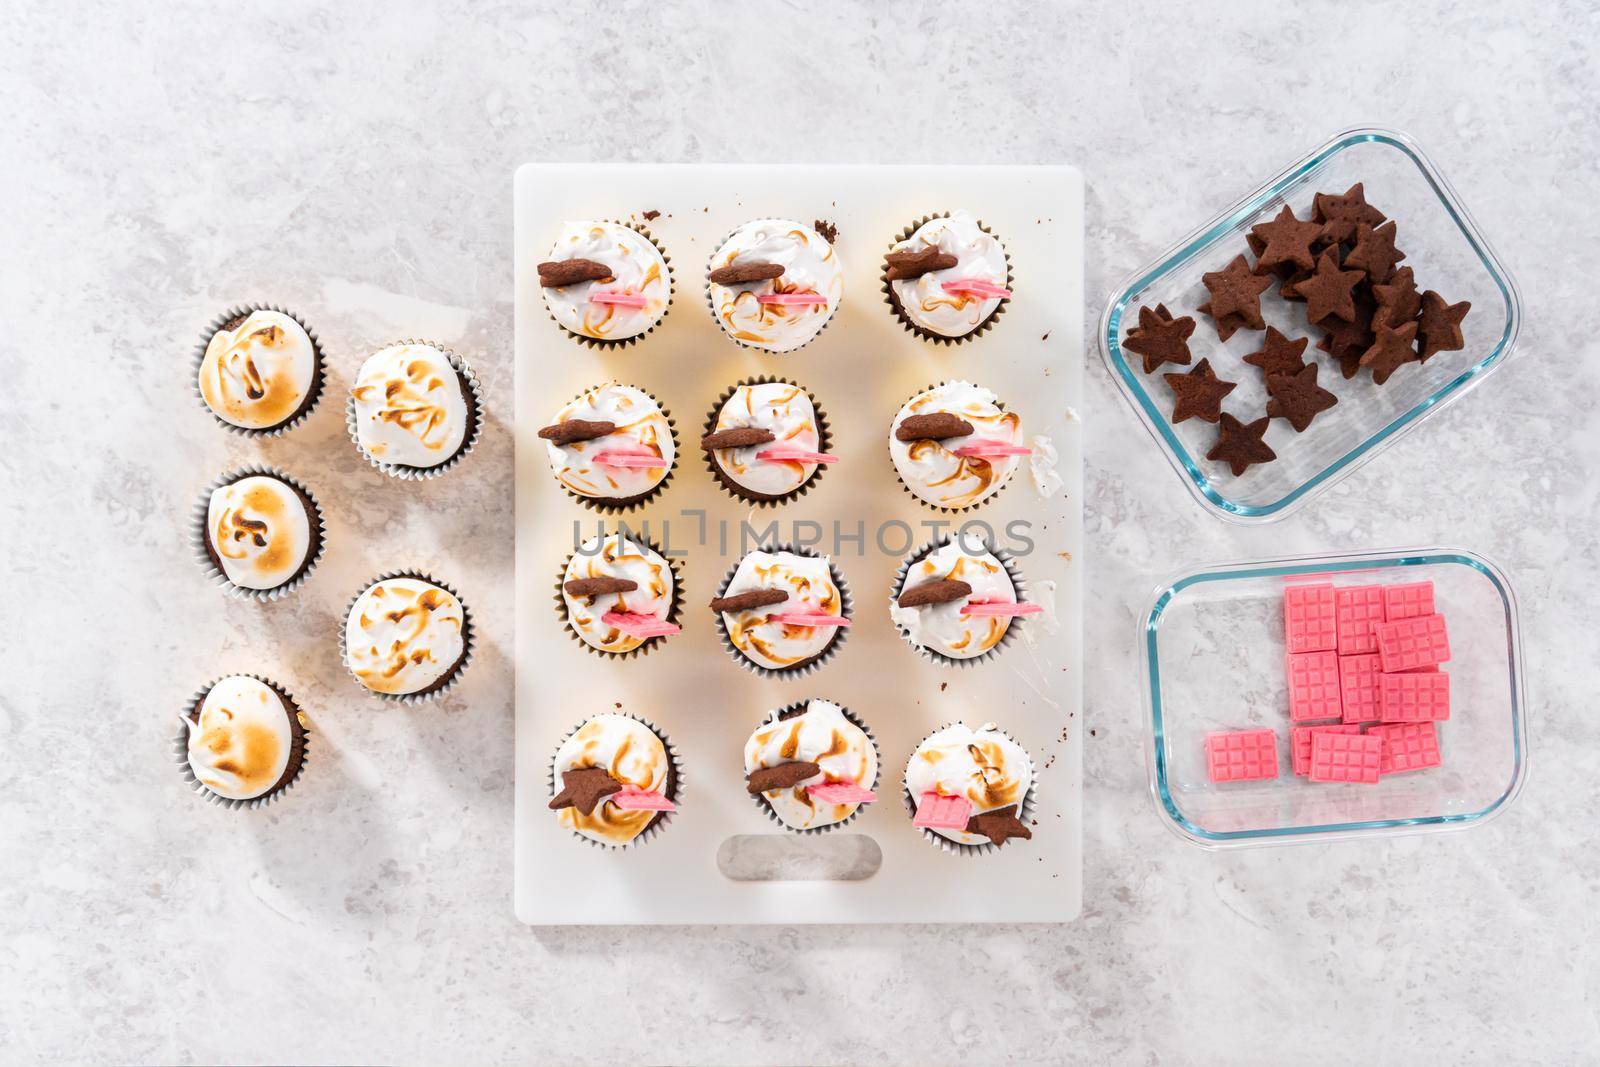 Flat lay. Gourmet s'mores cupcakes with meringue frosting and garnished with star-shaped chocolate graham cracker and a mini pink chocolate bar.